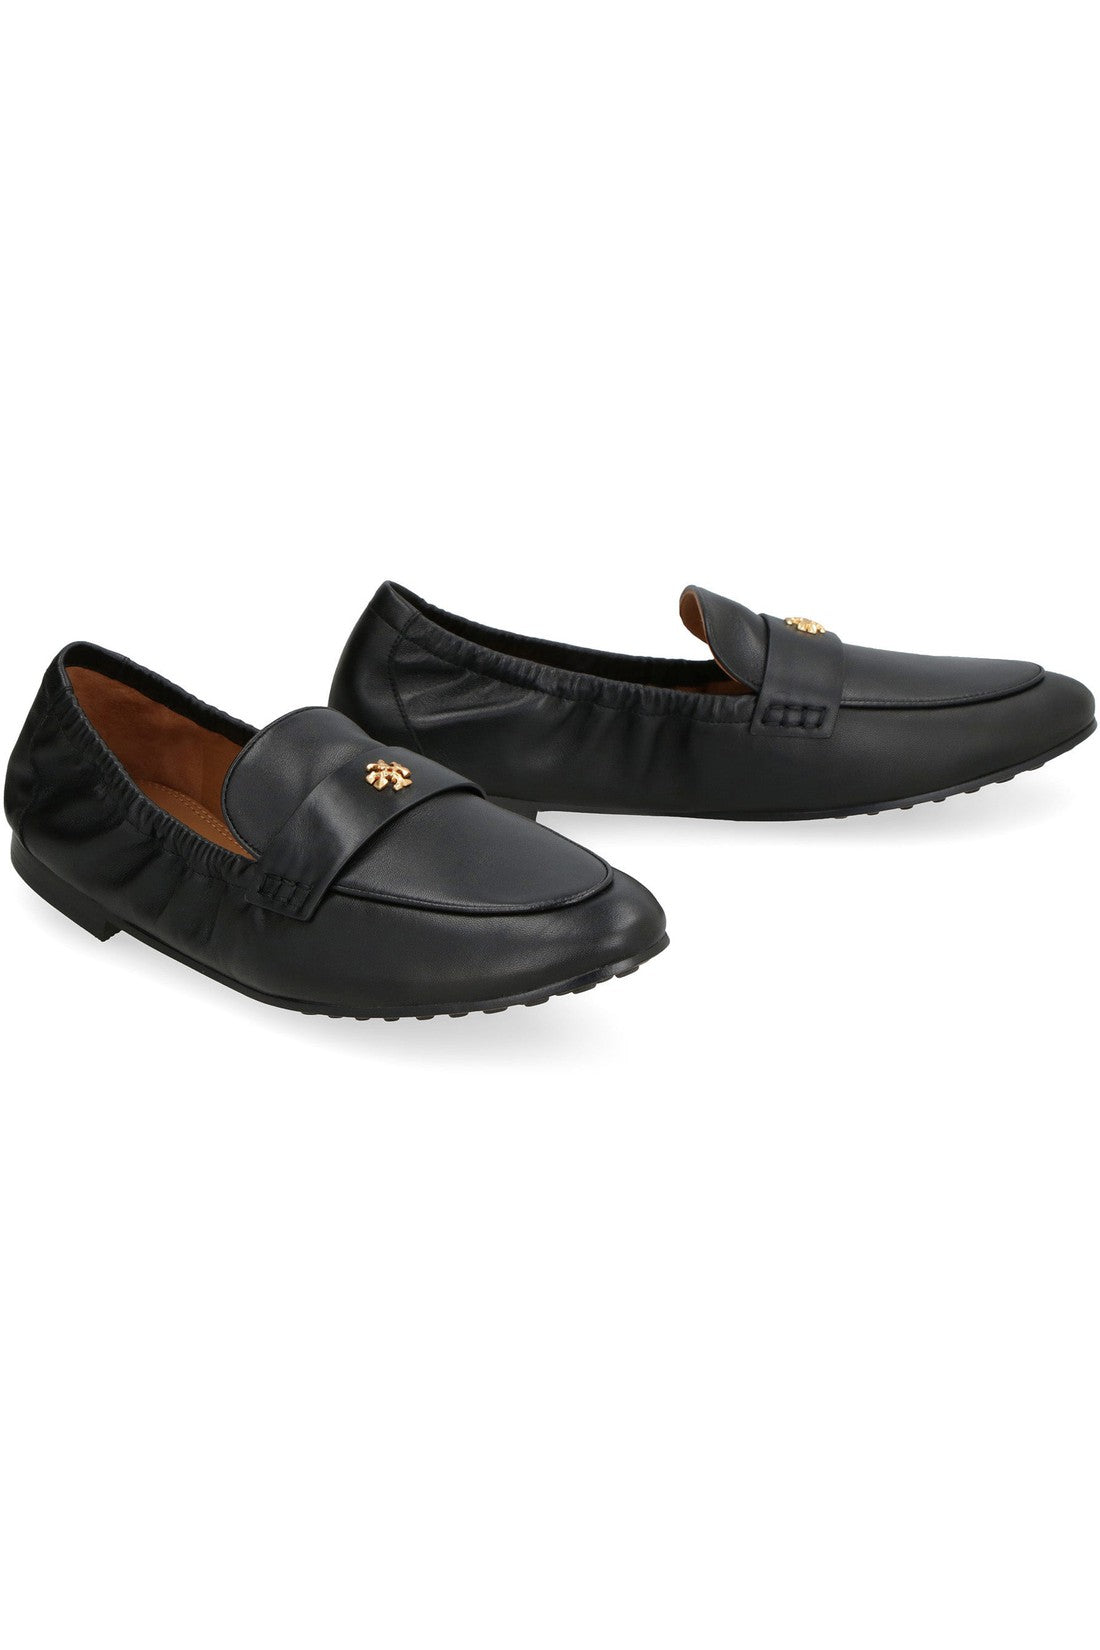 Tory Burch-OUTLET-SALE-Leather ballet loafer-ARCHIVIST